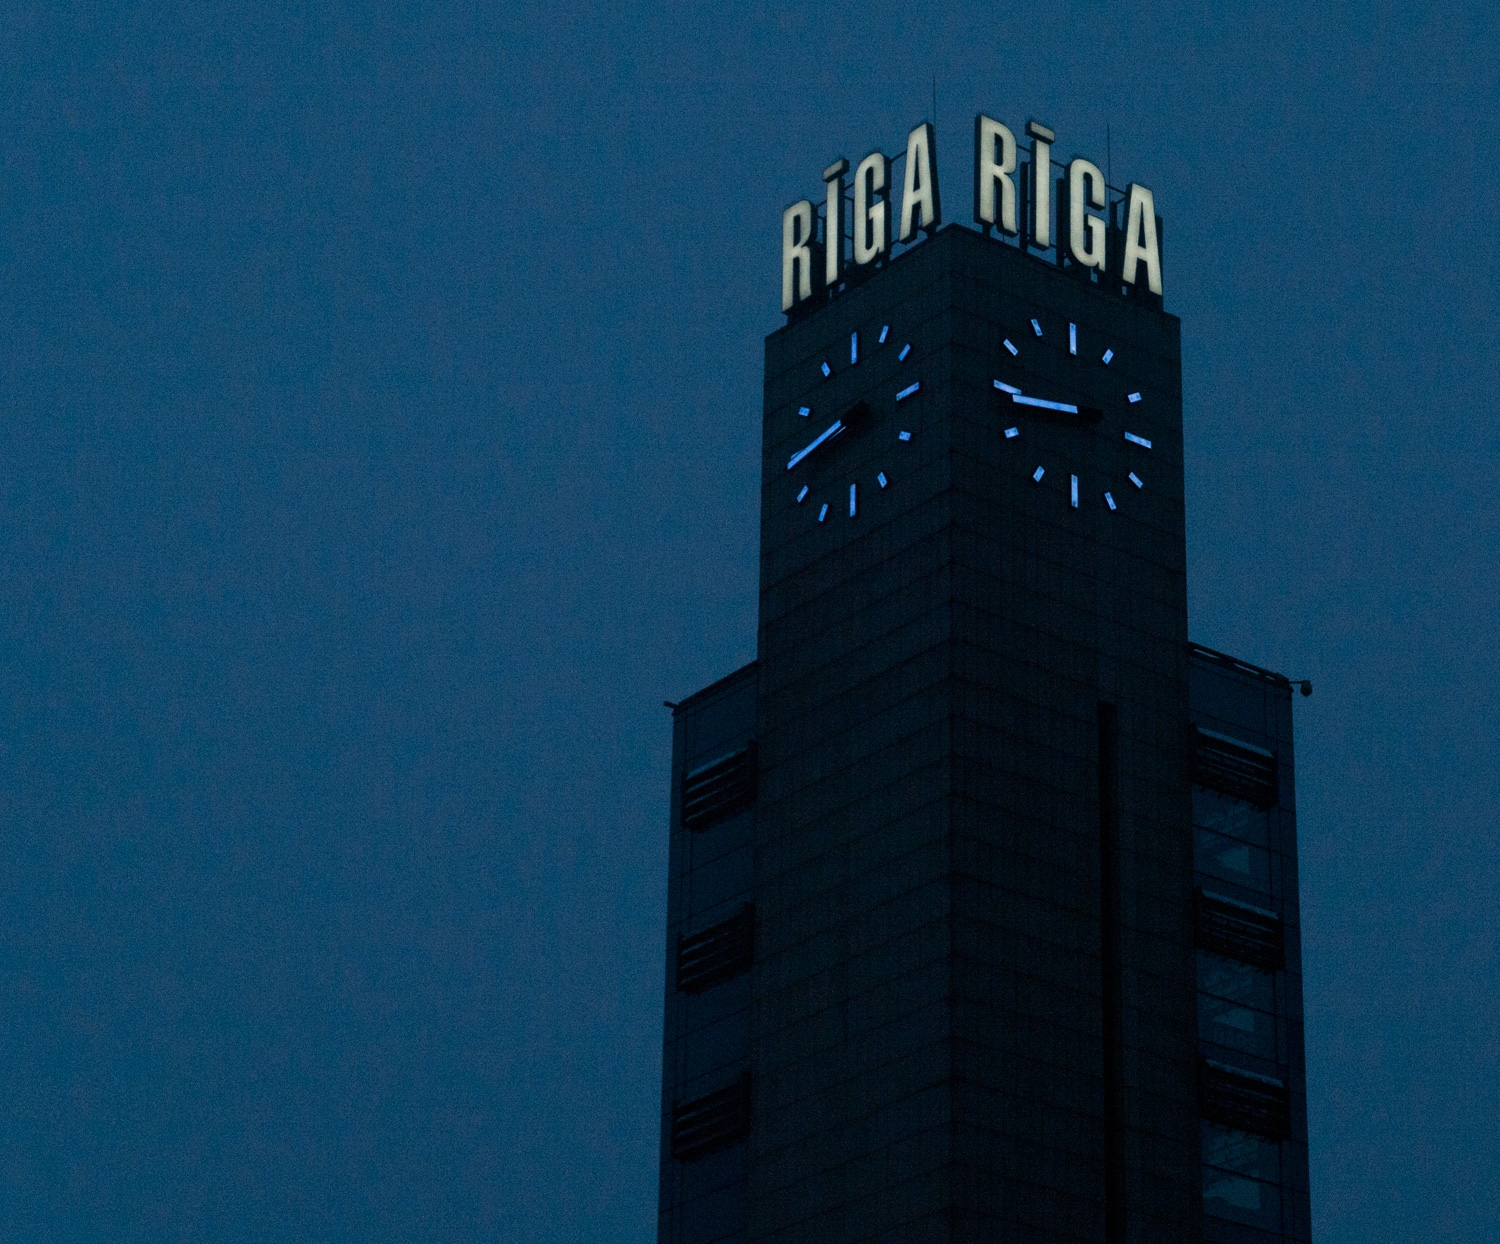 The Time Is Riga